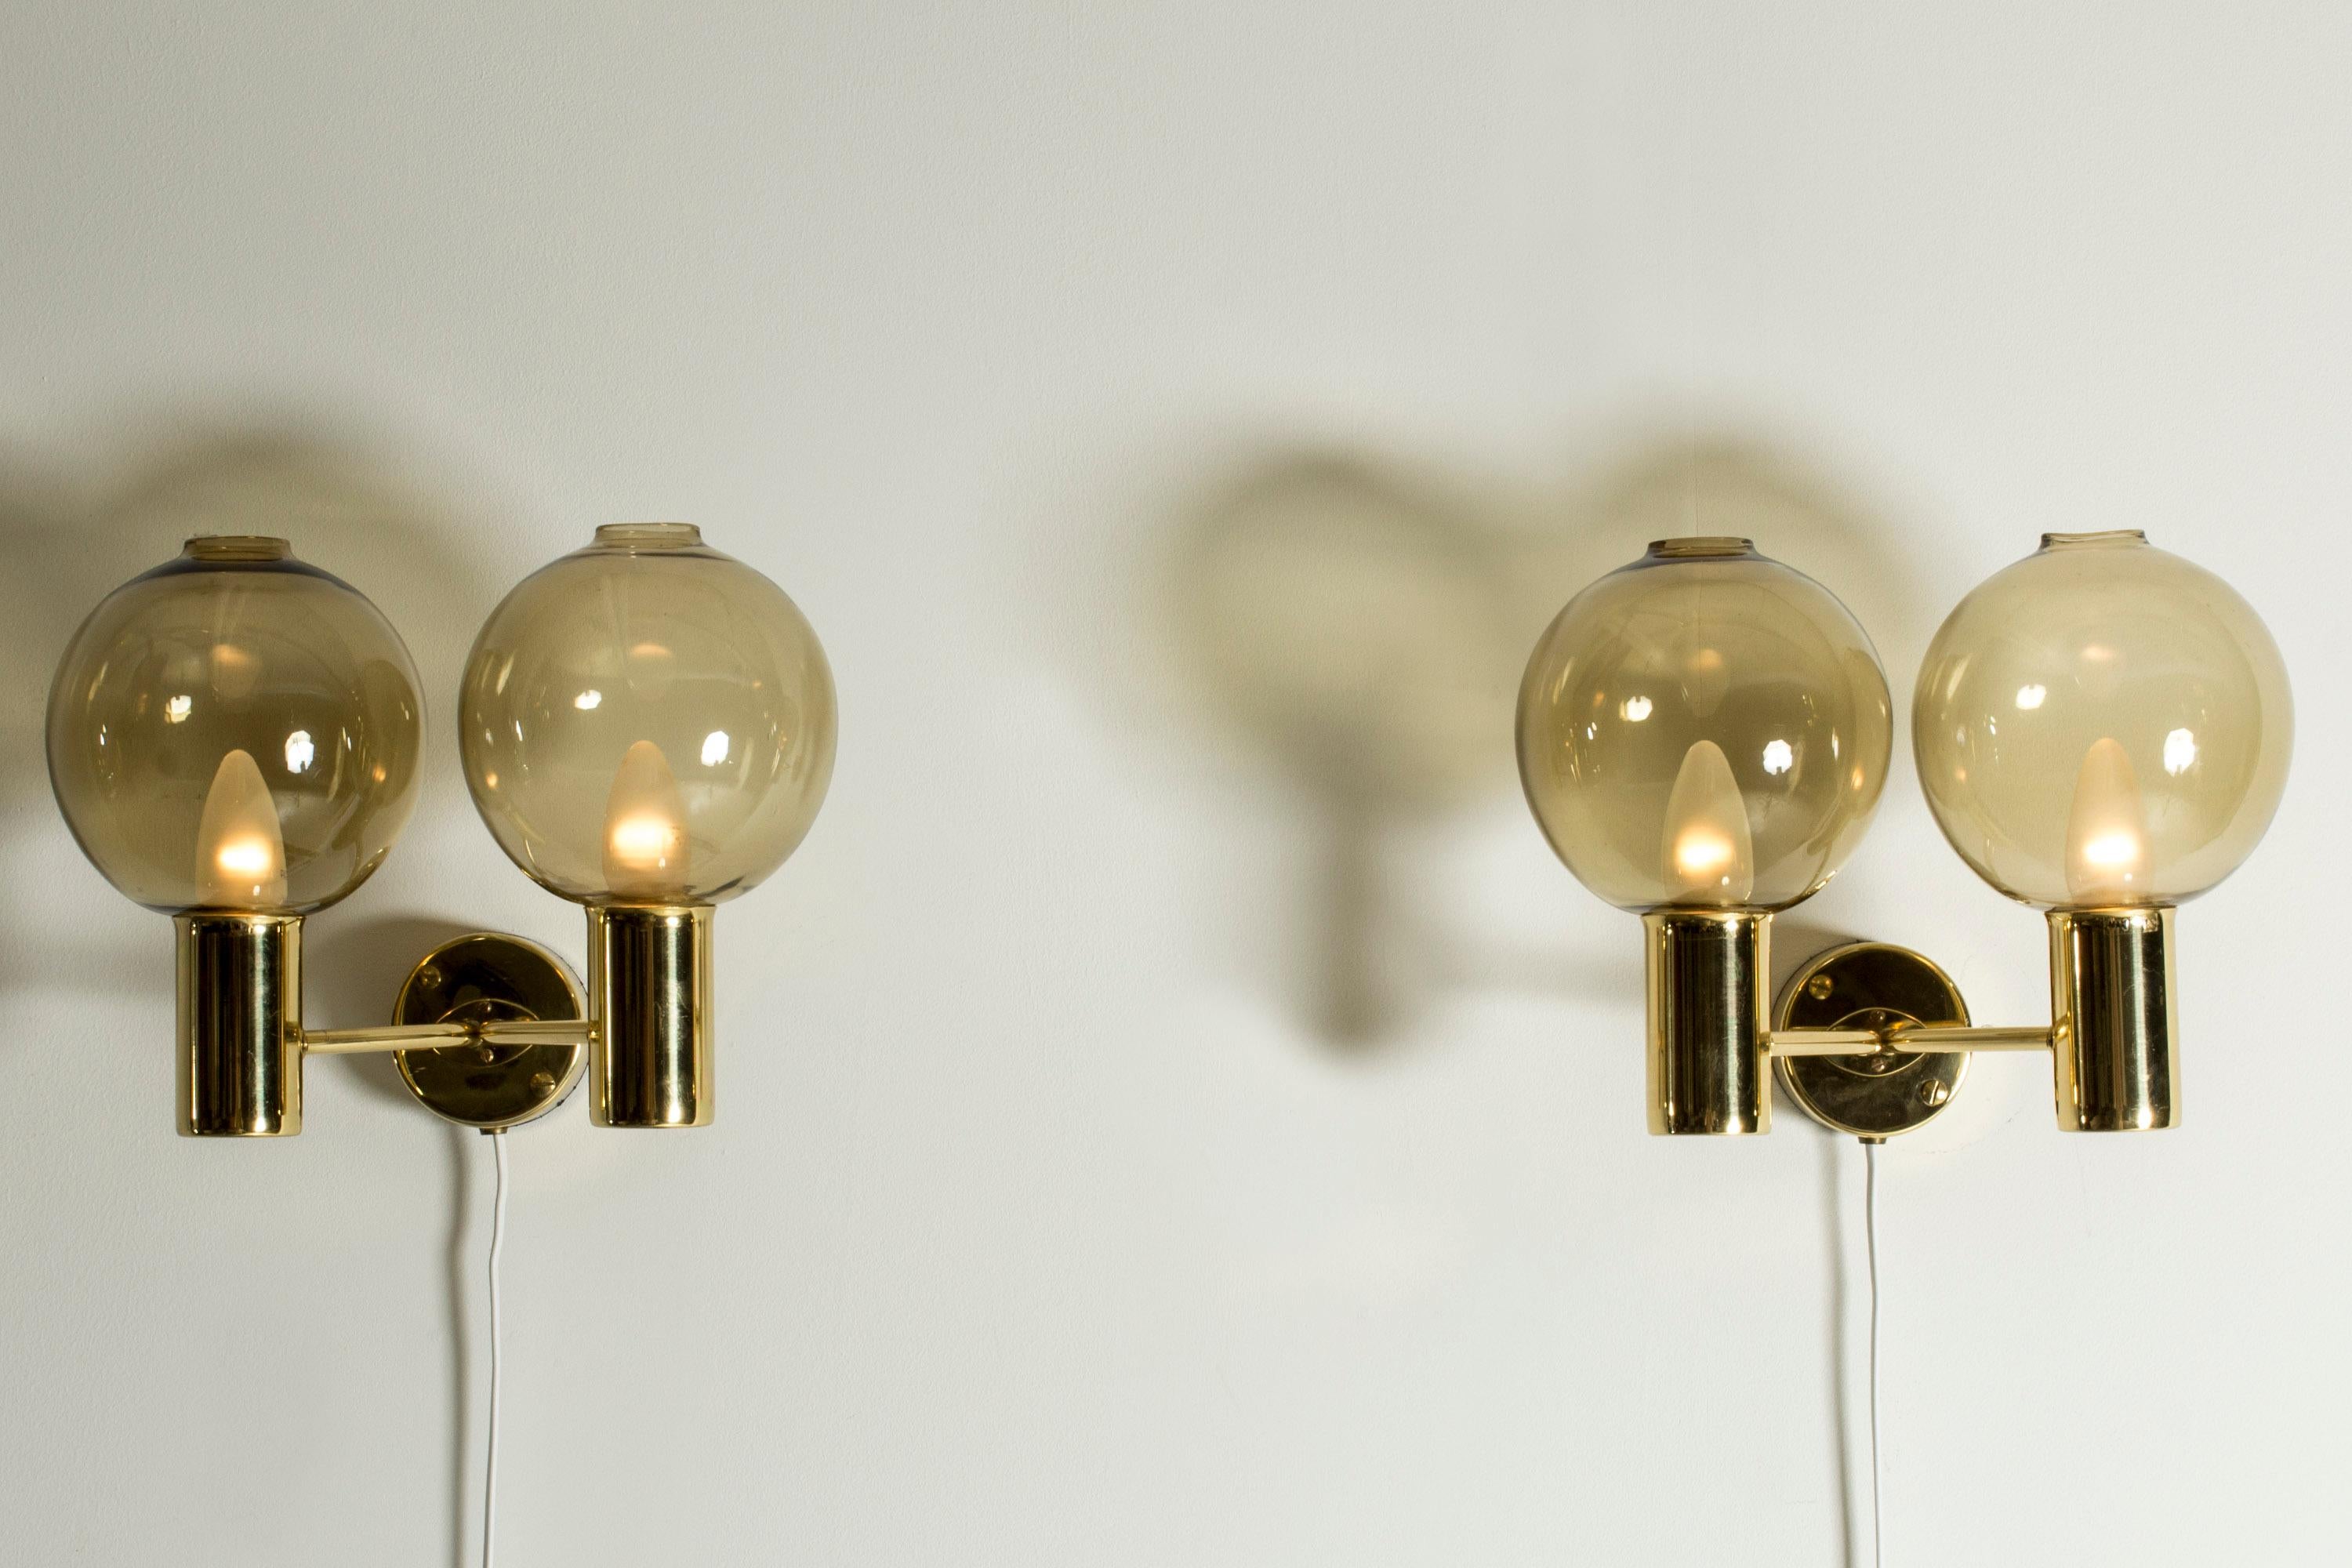 Pair of wall lamps by Hans-Agne Jakobsson, with brass frames and smoke colored glass shades. Sleek brass forms combine with the soap bubbly lightness of the shades.